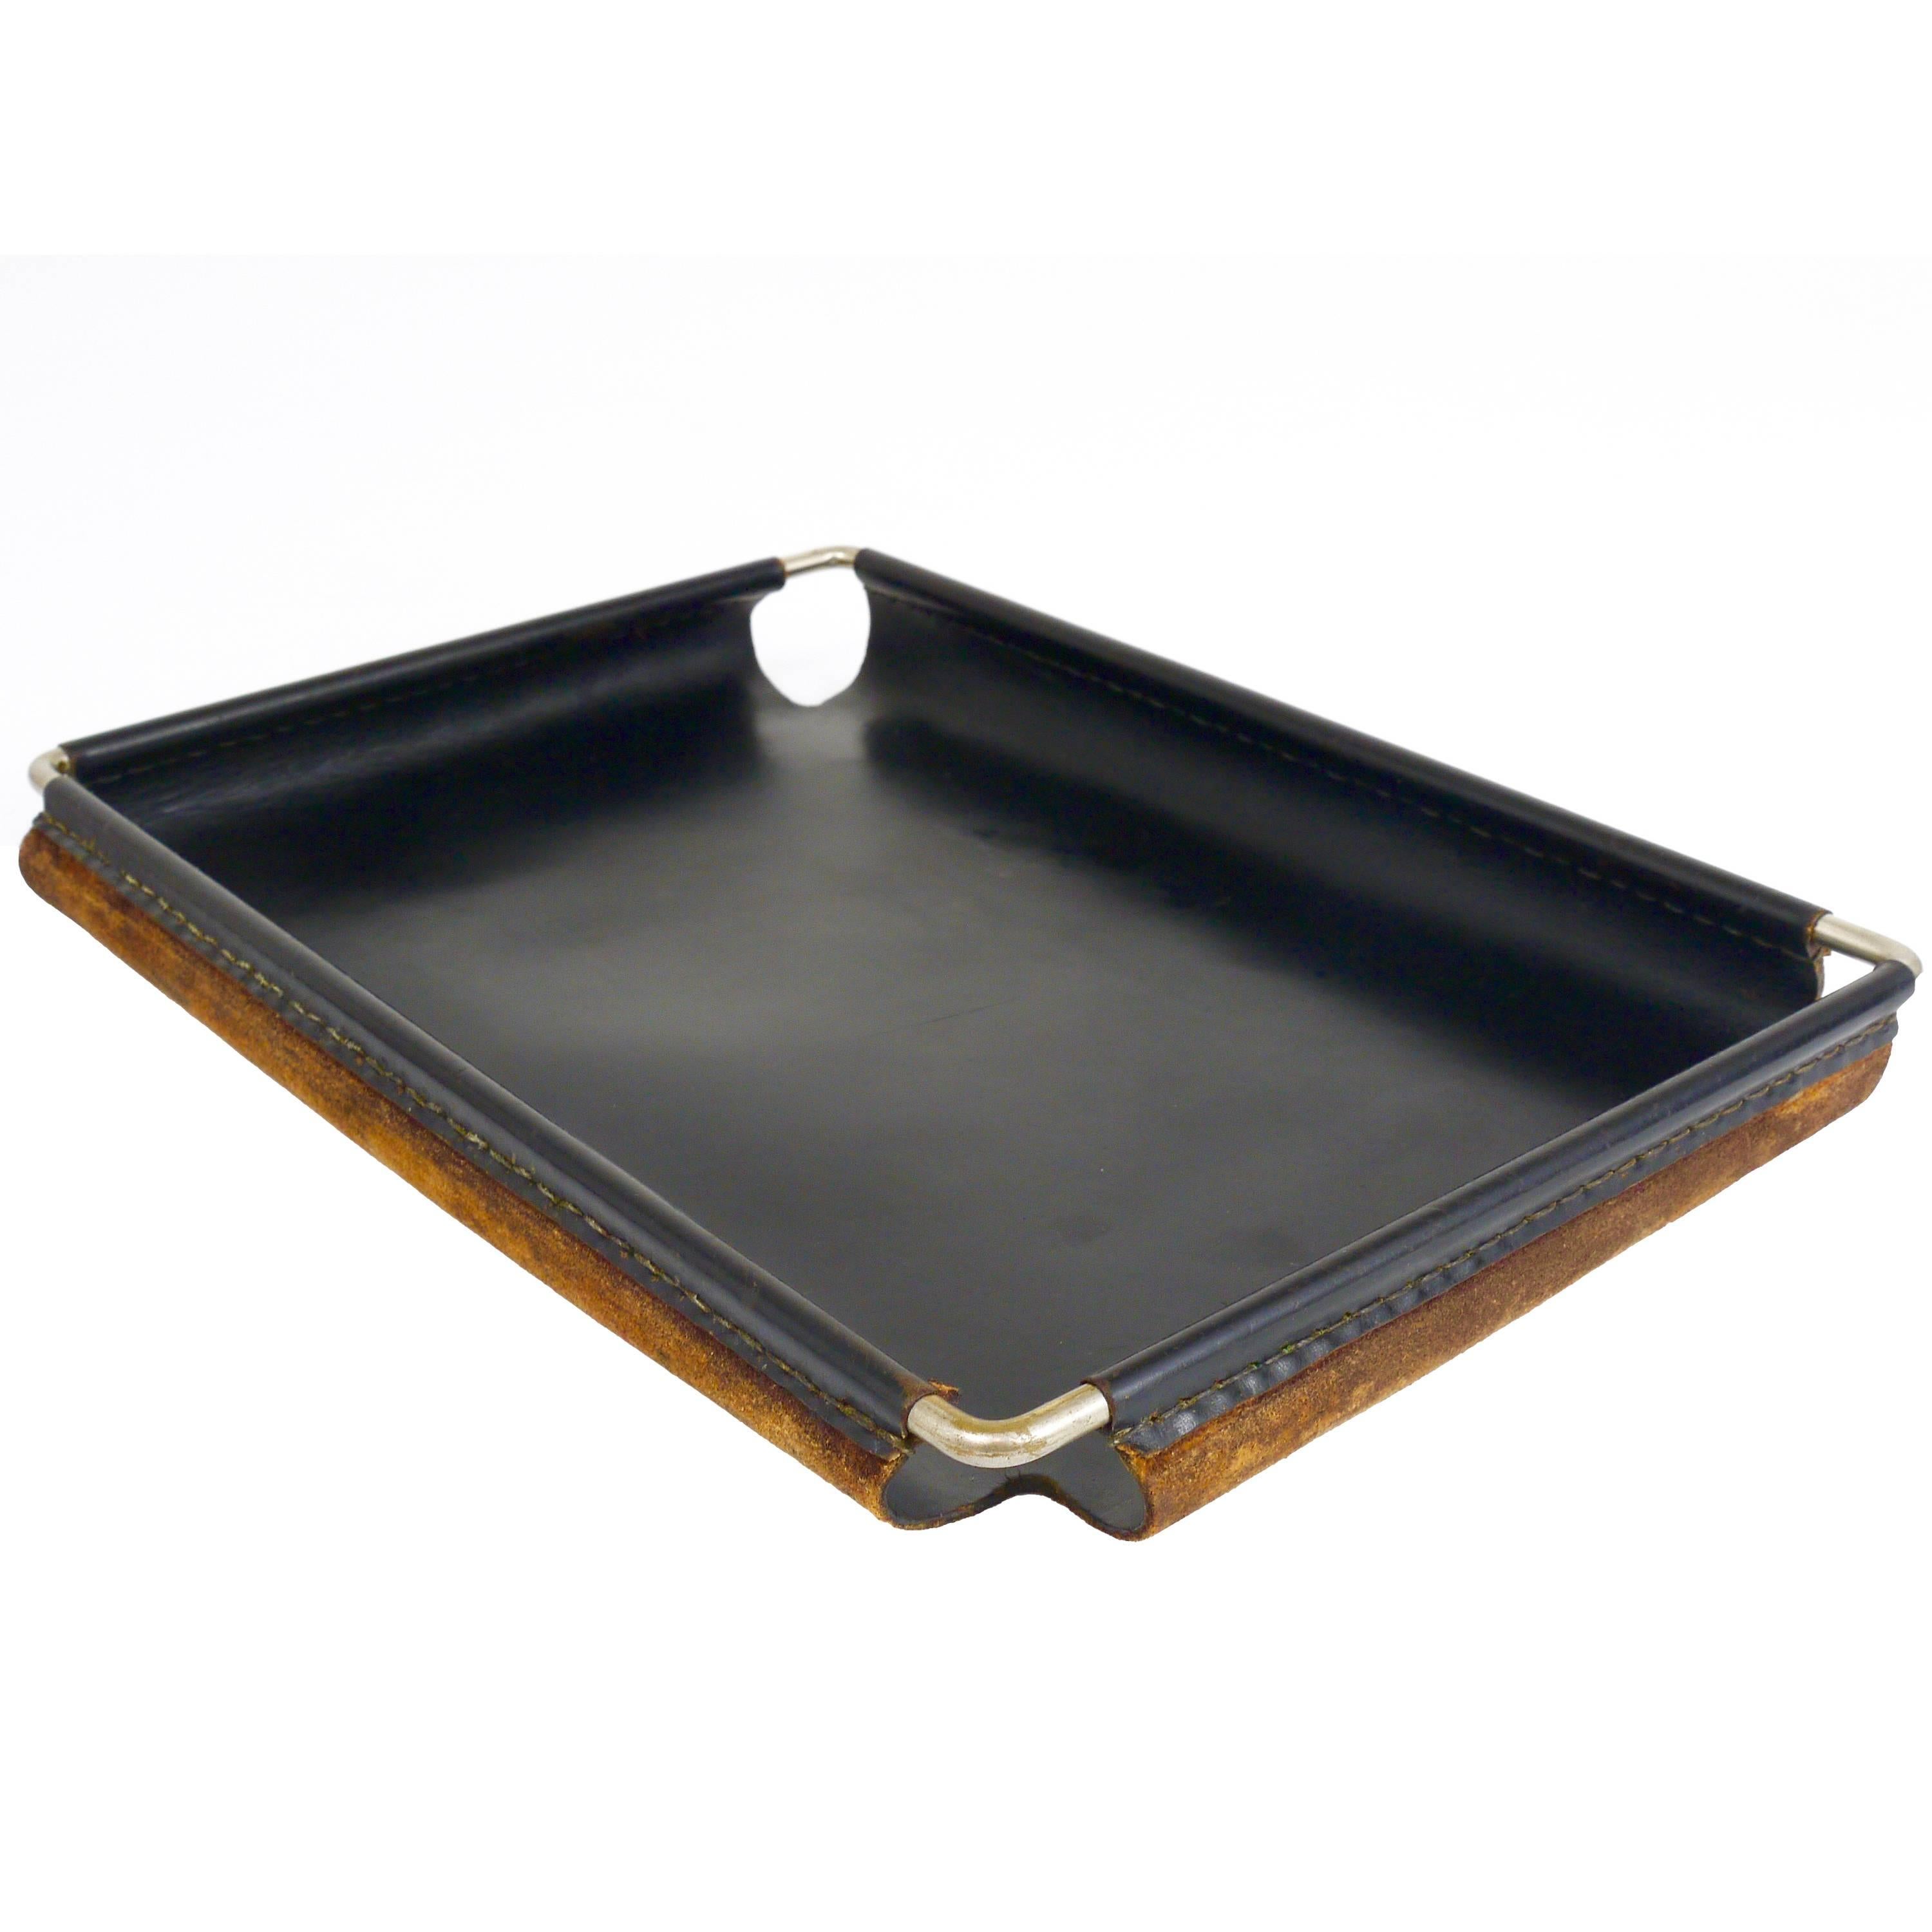 Carl Aubock Leather and Brass Square Letter Tray, 1940s, Austria